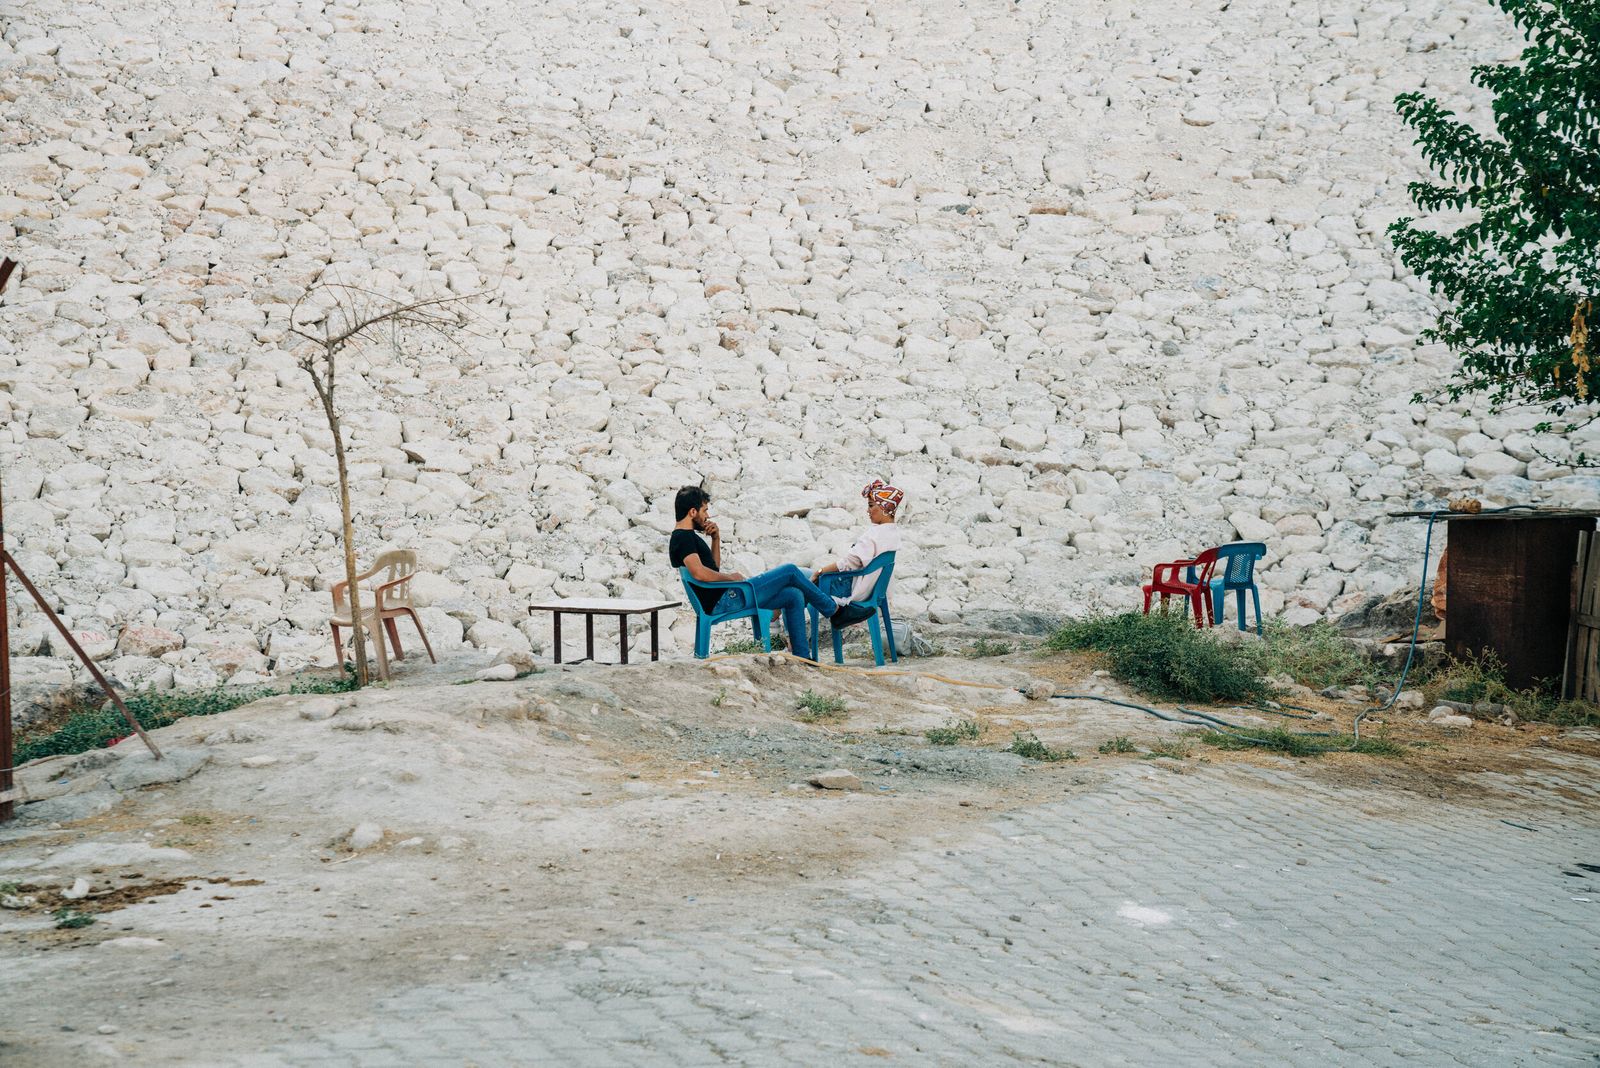 © Hussain Alsaden - Image from the Hasankeyf photography project